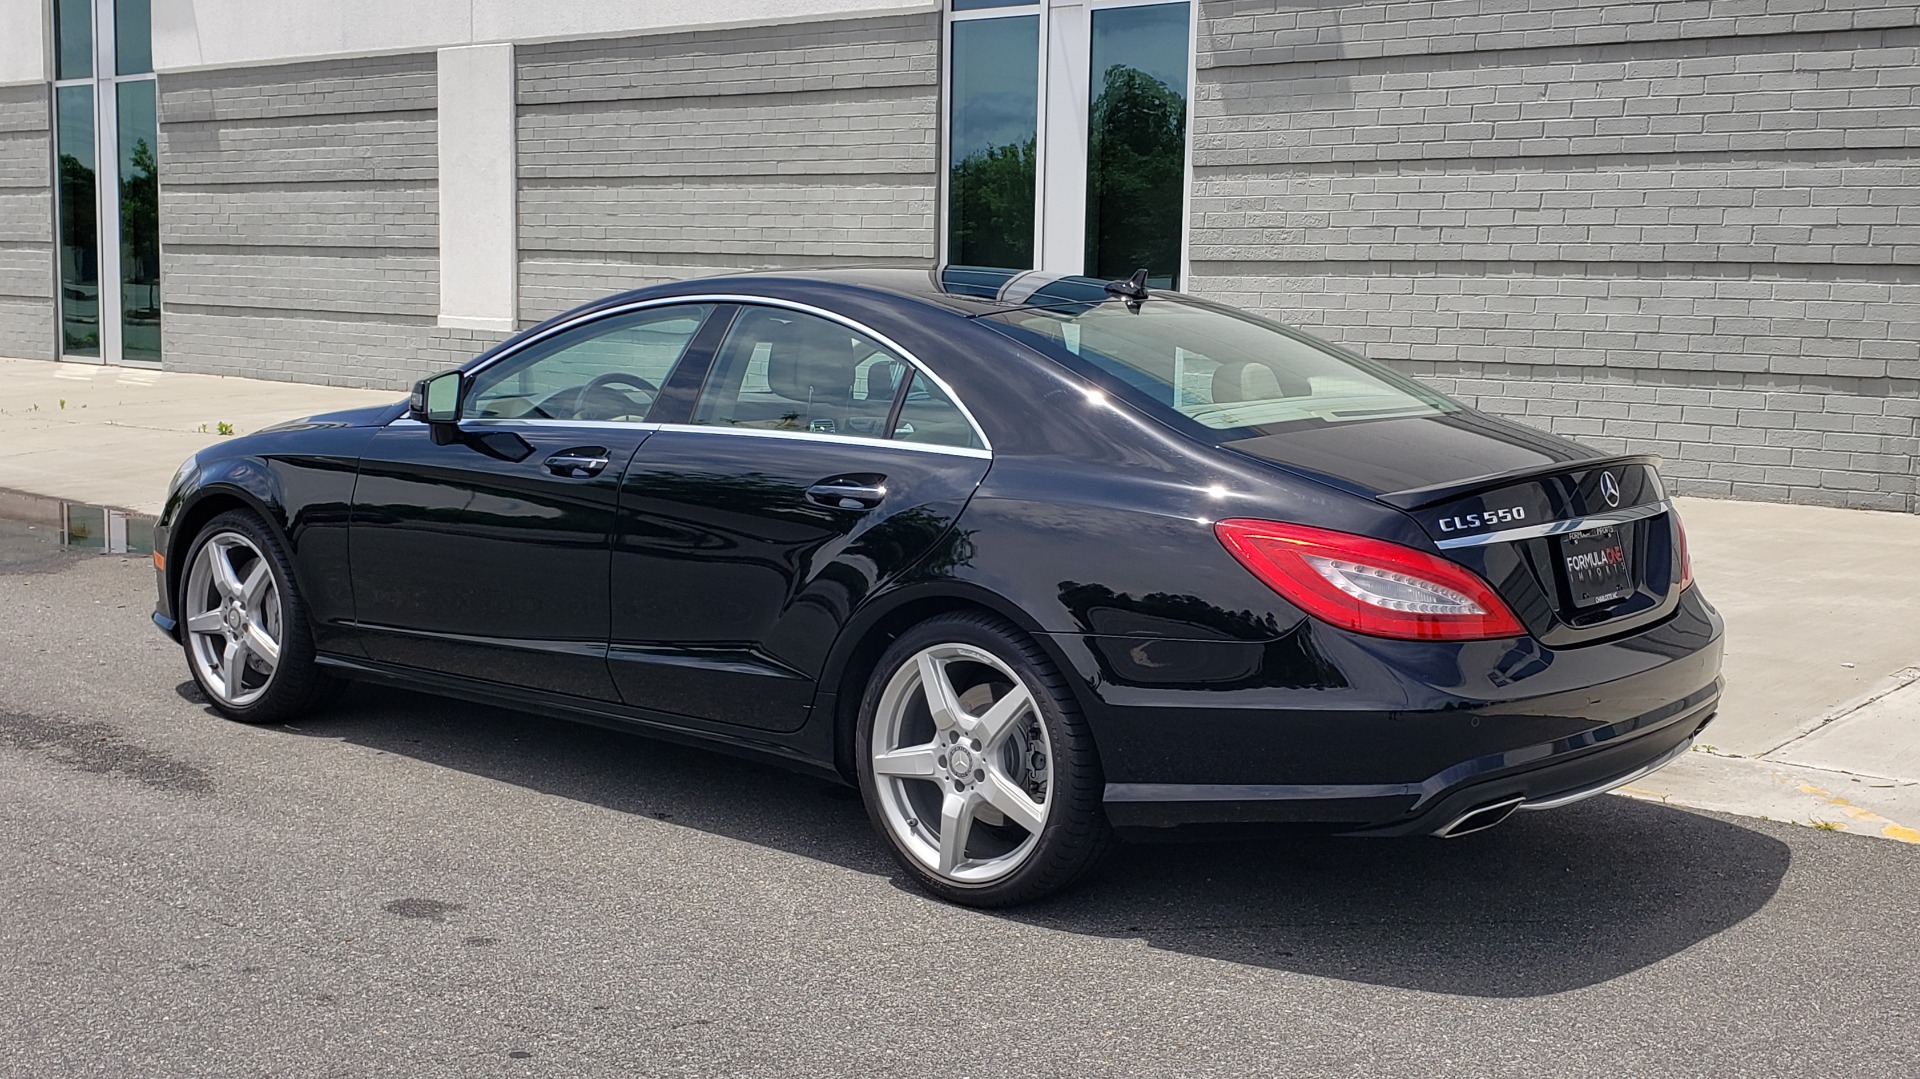 Used 2014 Mercedes-Benz CLS-Class CLS 550 PREMIUM / AMG SPORT WHLS / SUNROOF / LANE TRACK / PARKTRONIC for sale Sold at Formula Imports in Charlotte NC 28227 6